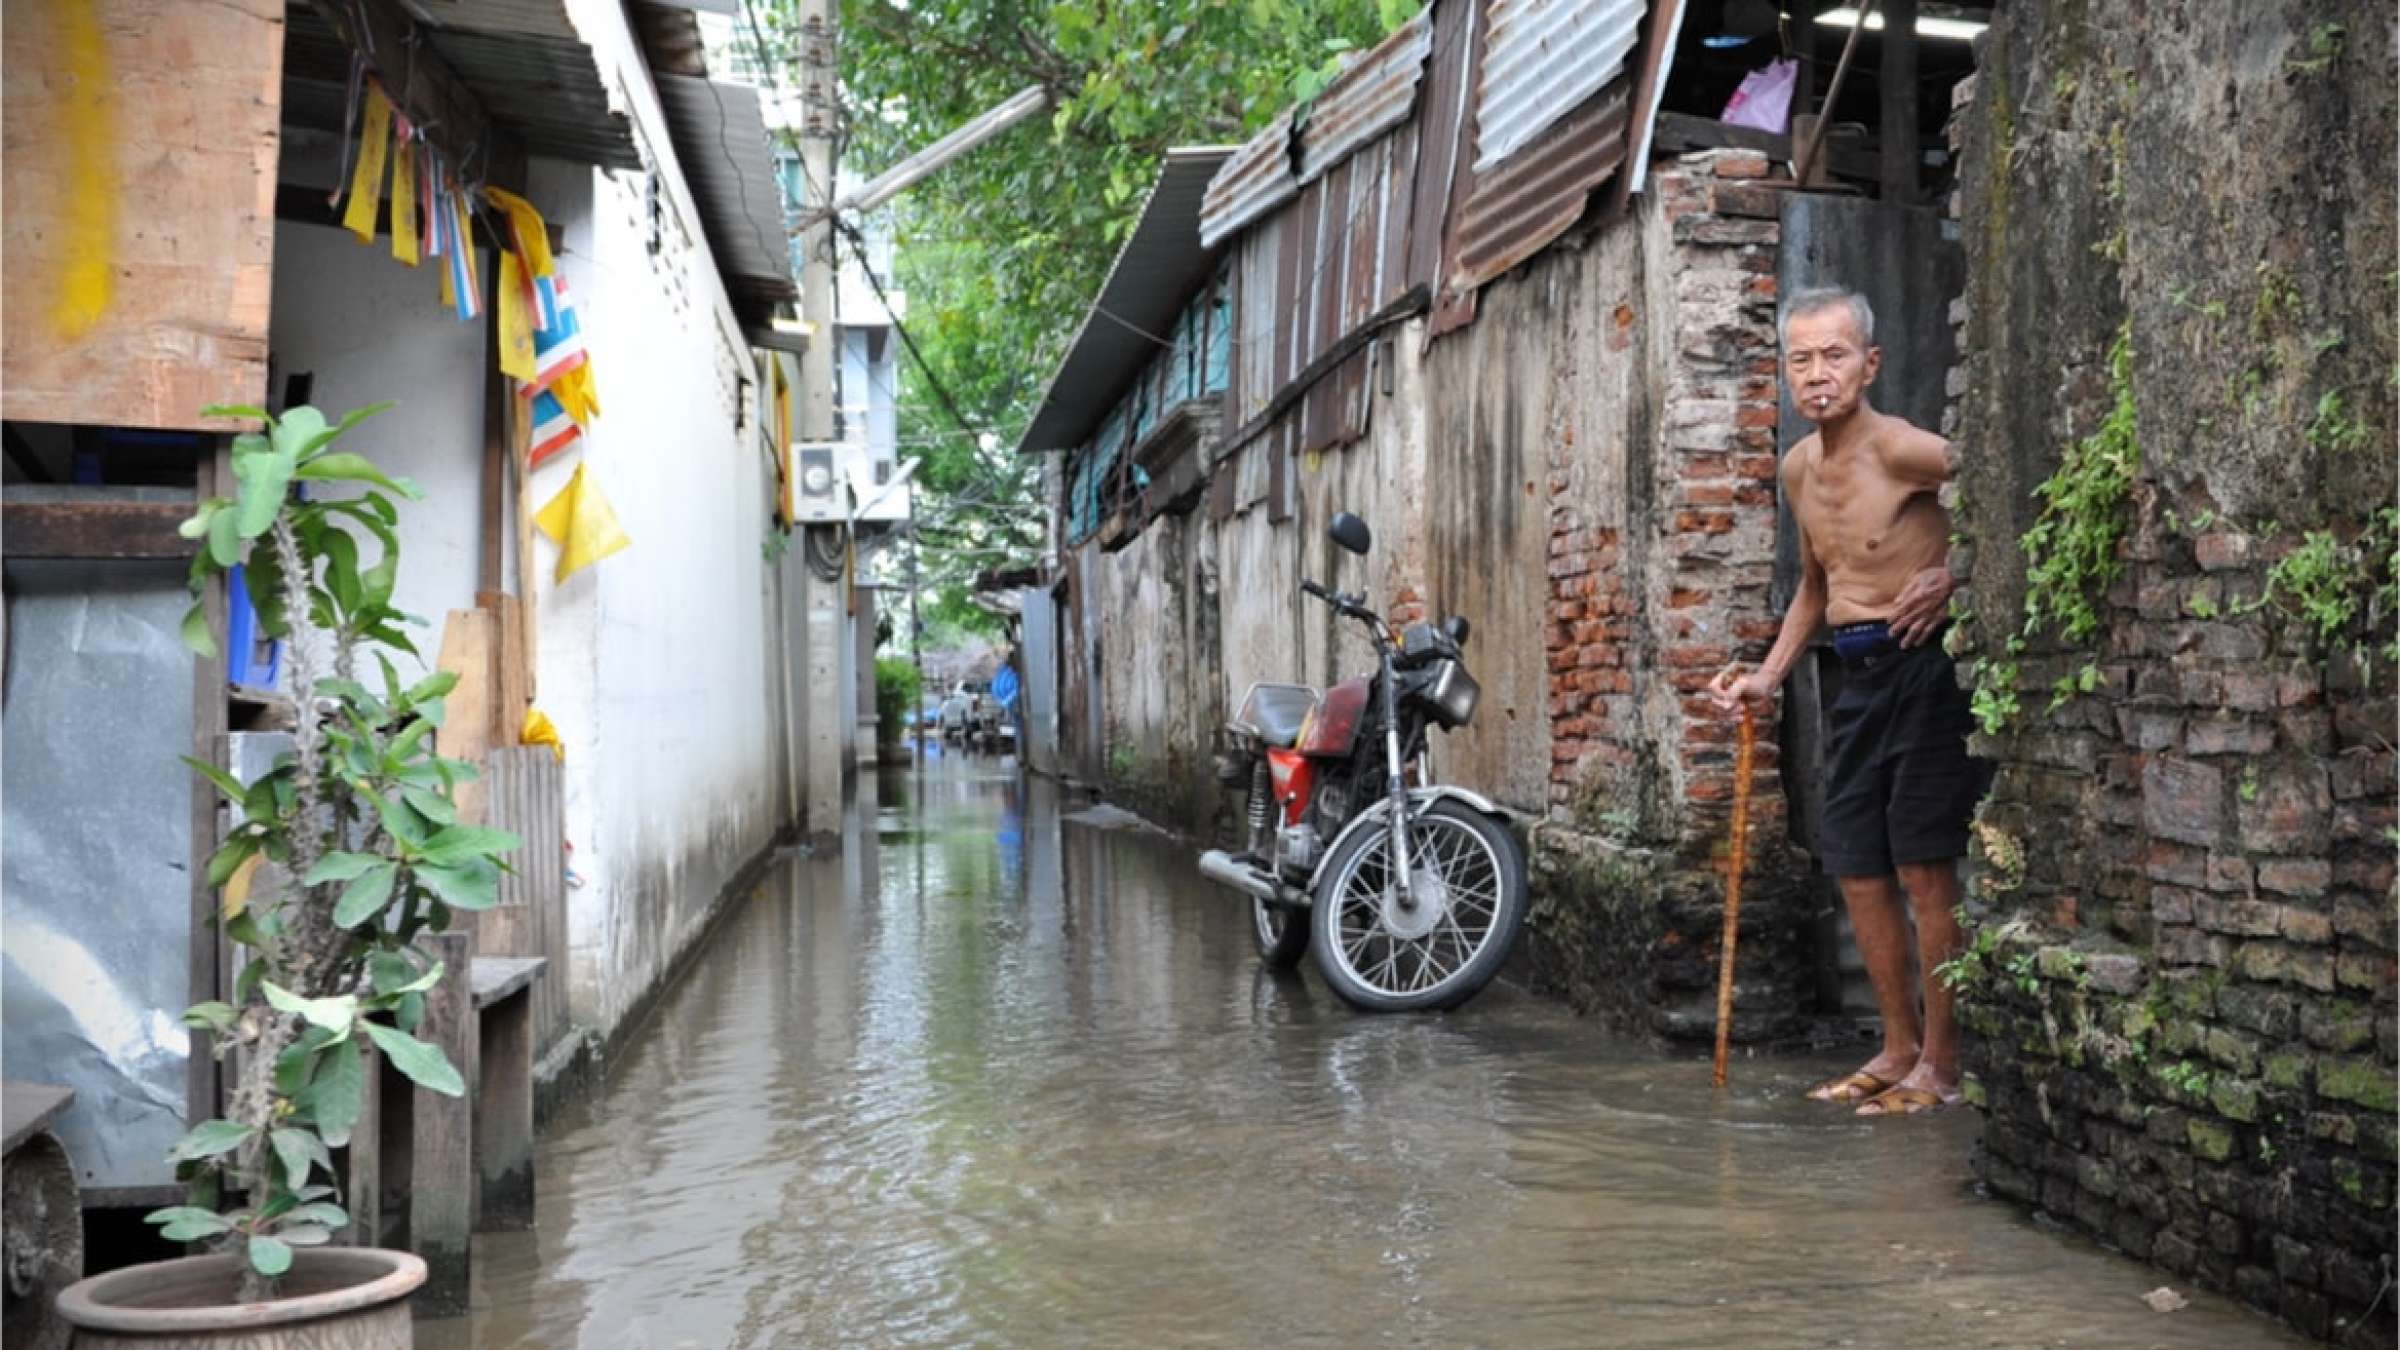 A man looks out on a flooded alley in Chinatown on Nov 22, 2011 in Bangkok, Thailand. The Thai capital is experiencing its worst flooding in decades with much of the city inundated.